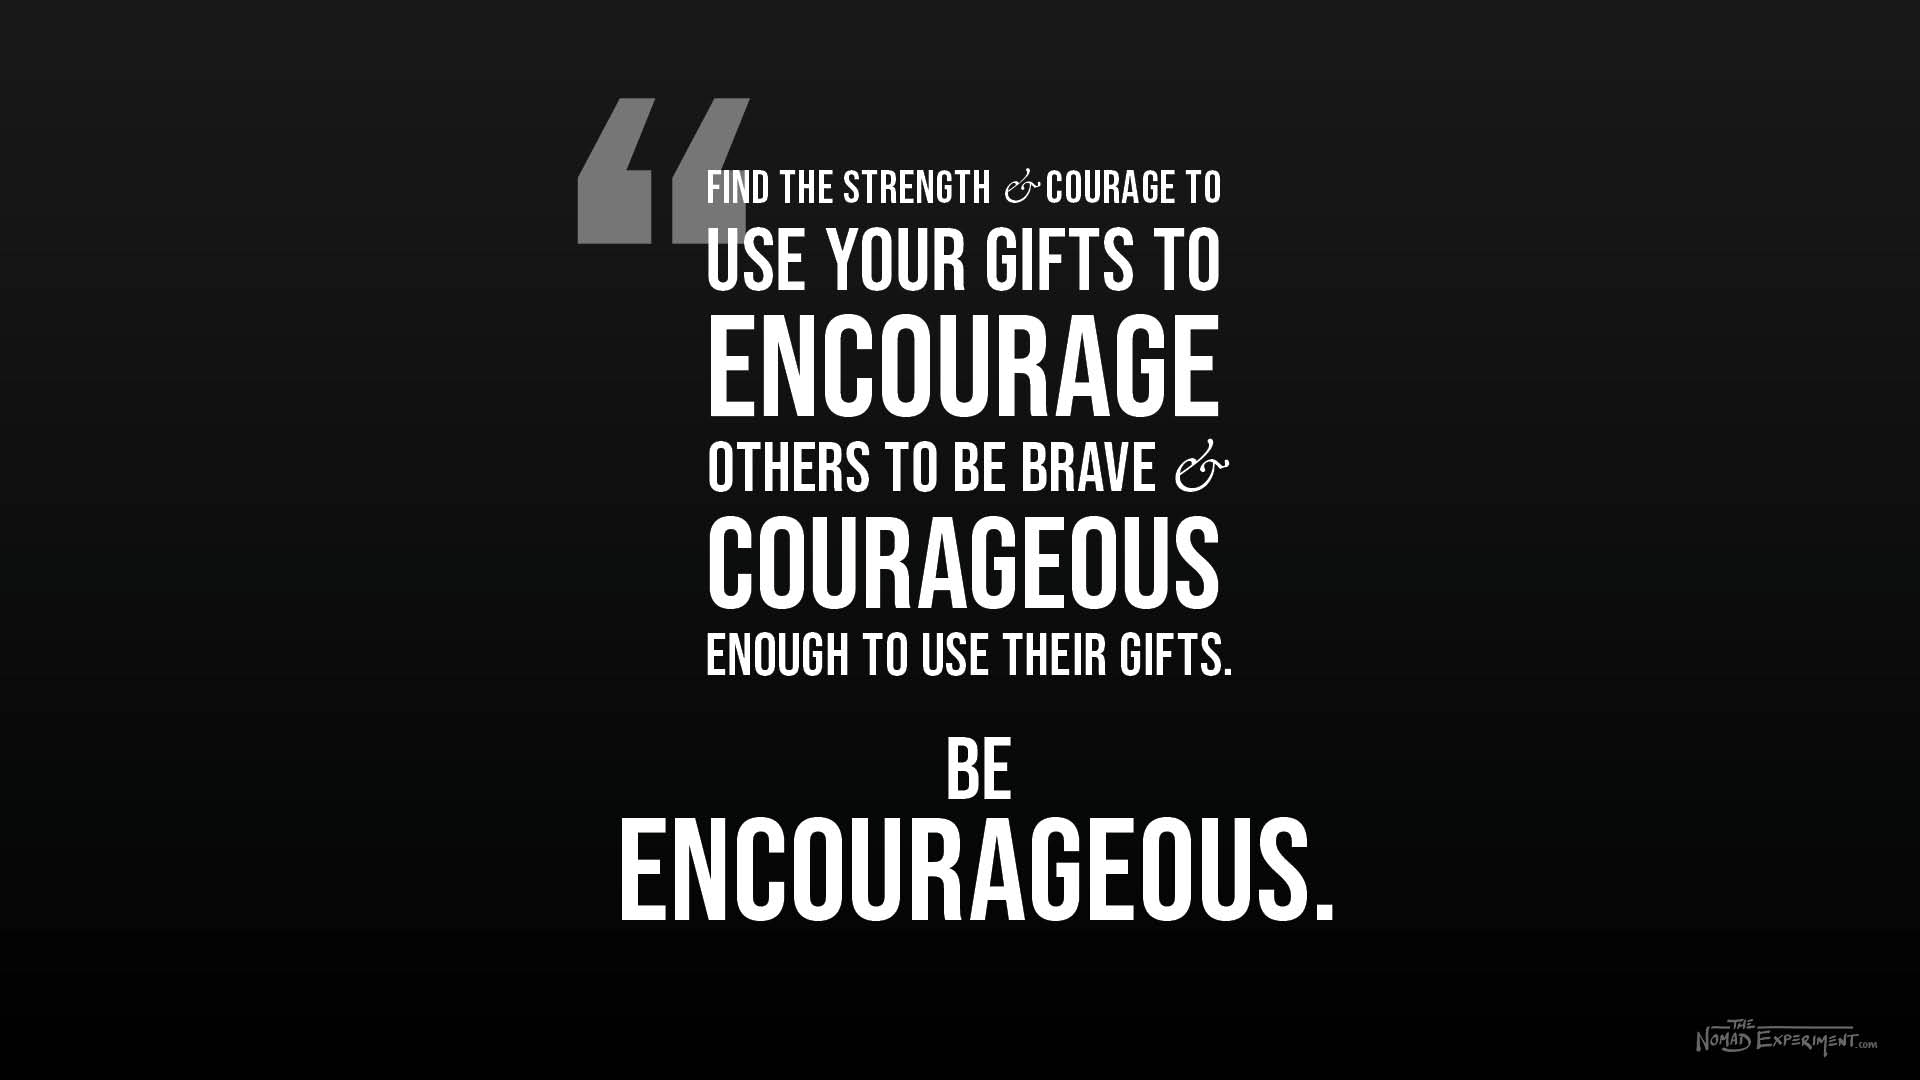 be encourageous article the nomad experiment jason robinson